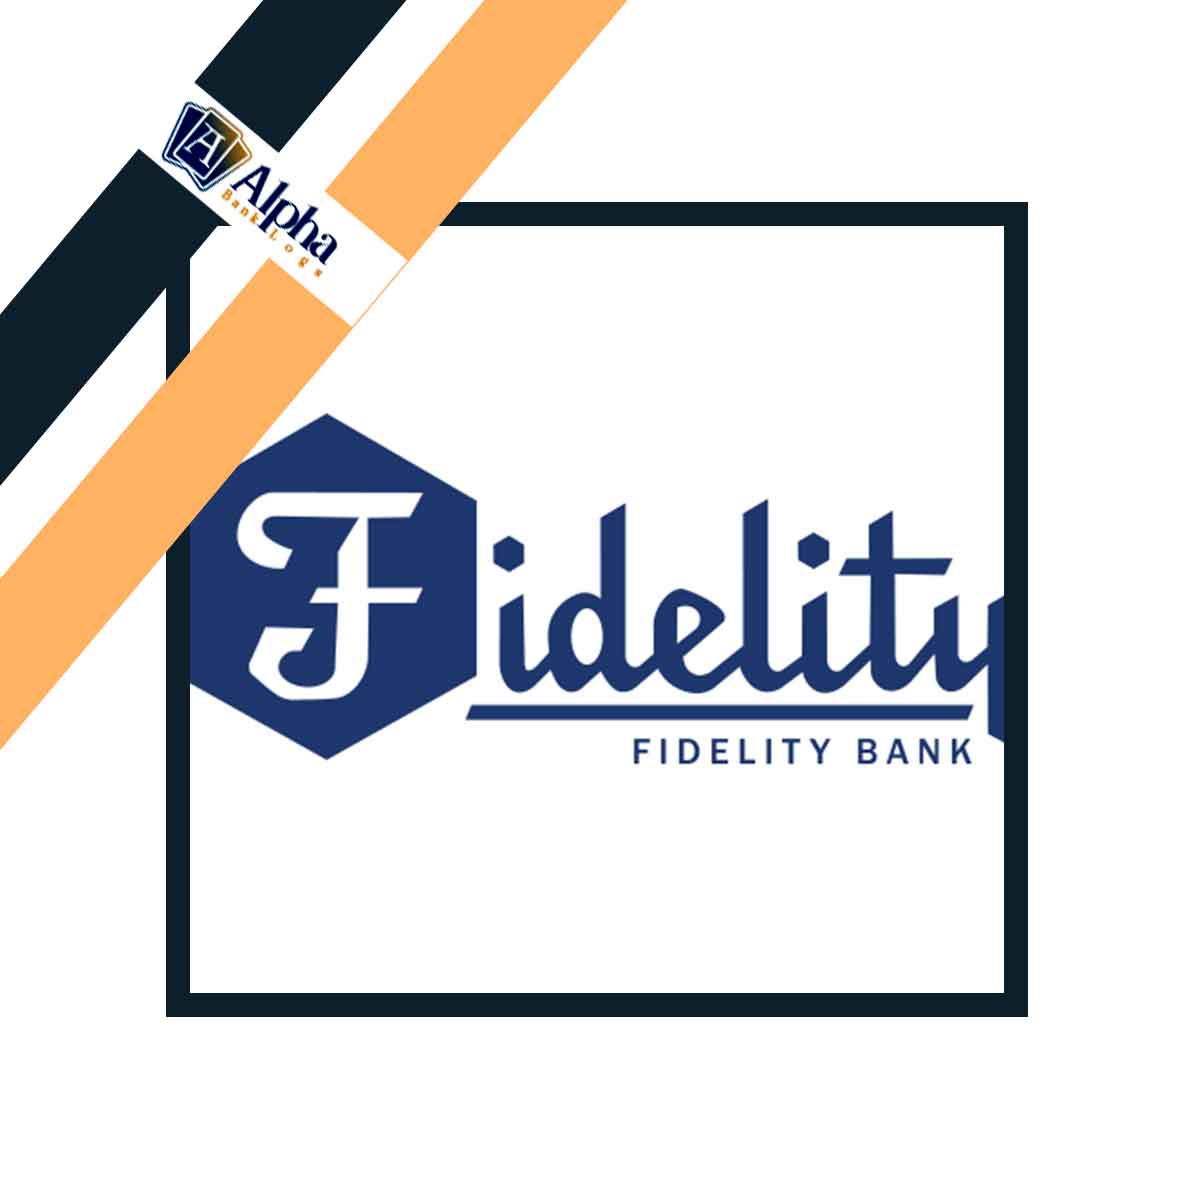 Fidelity Bankdrop linked to PayPal Account – All Logged in on RDP